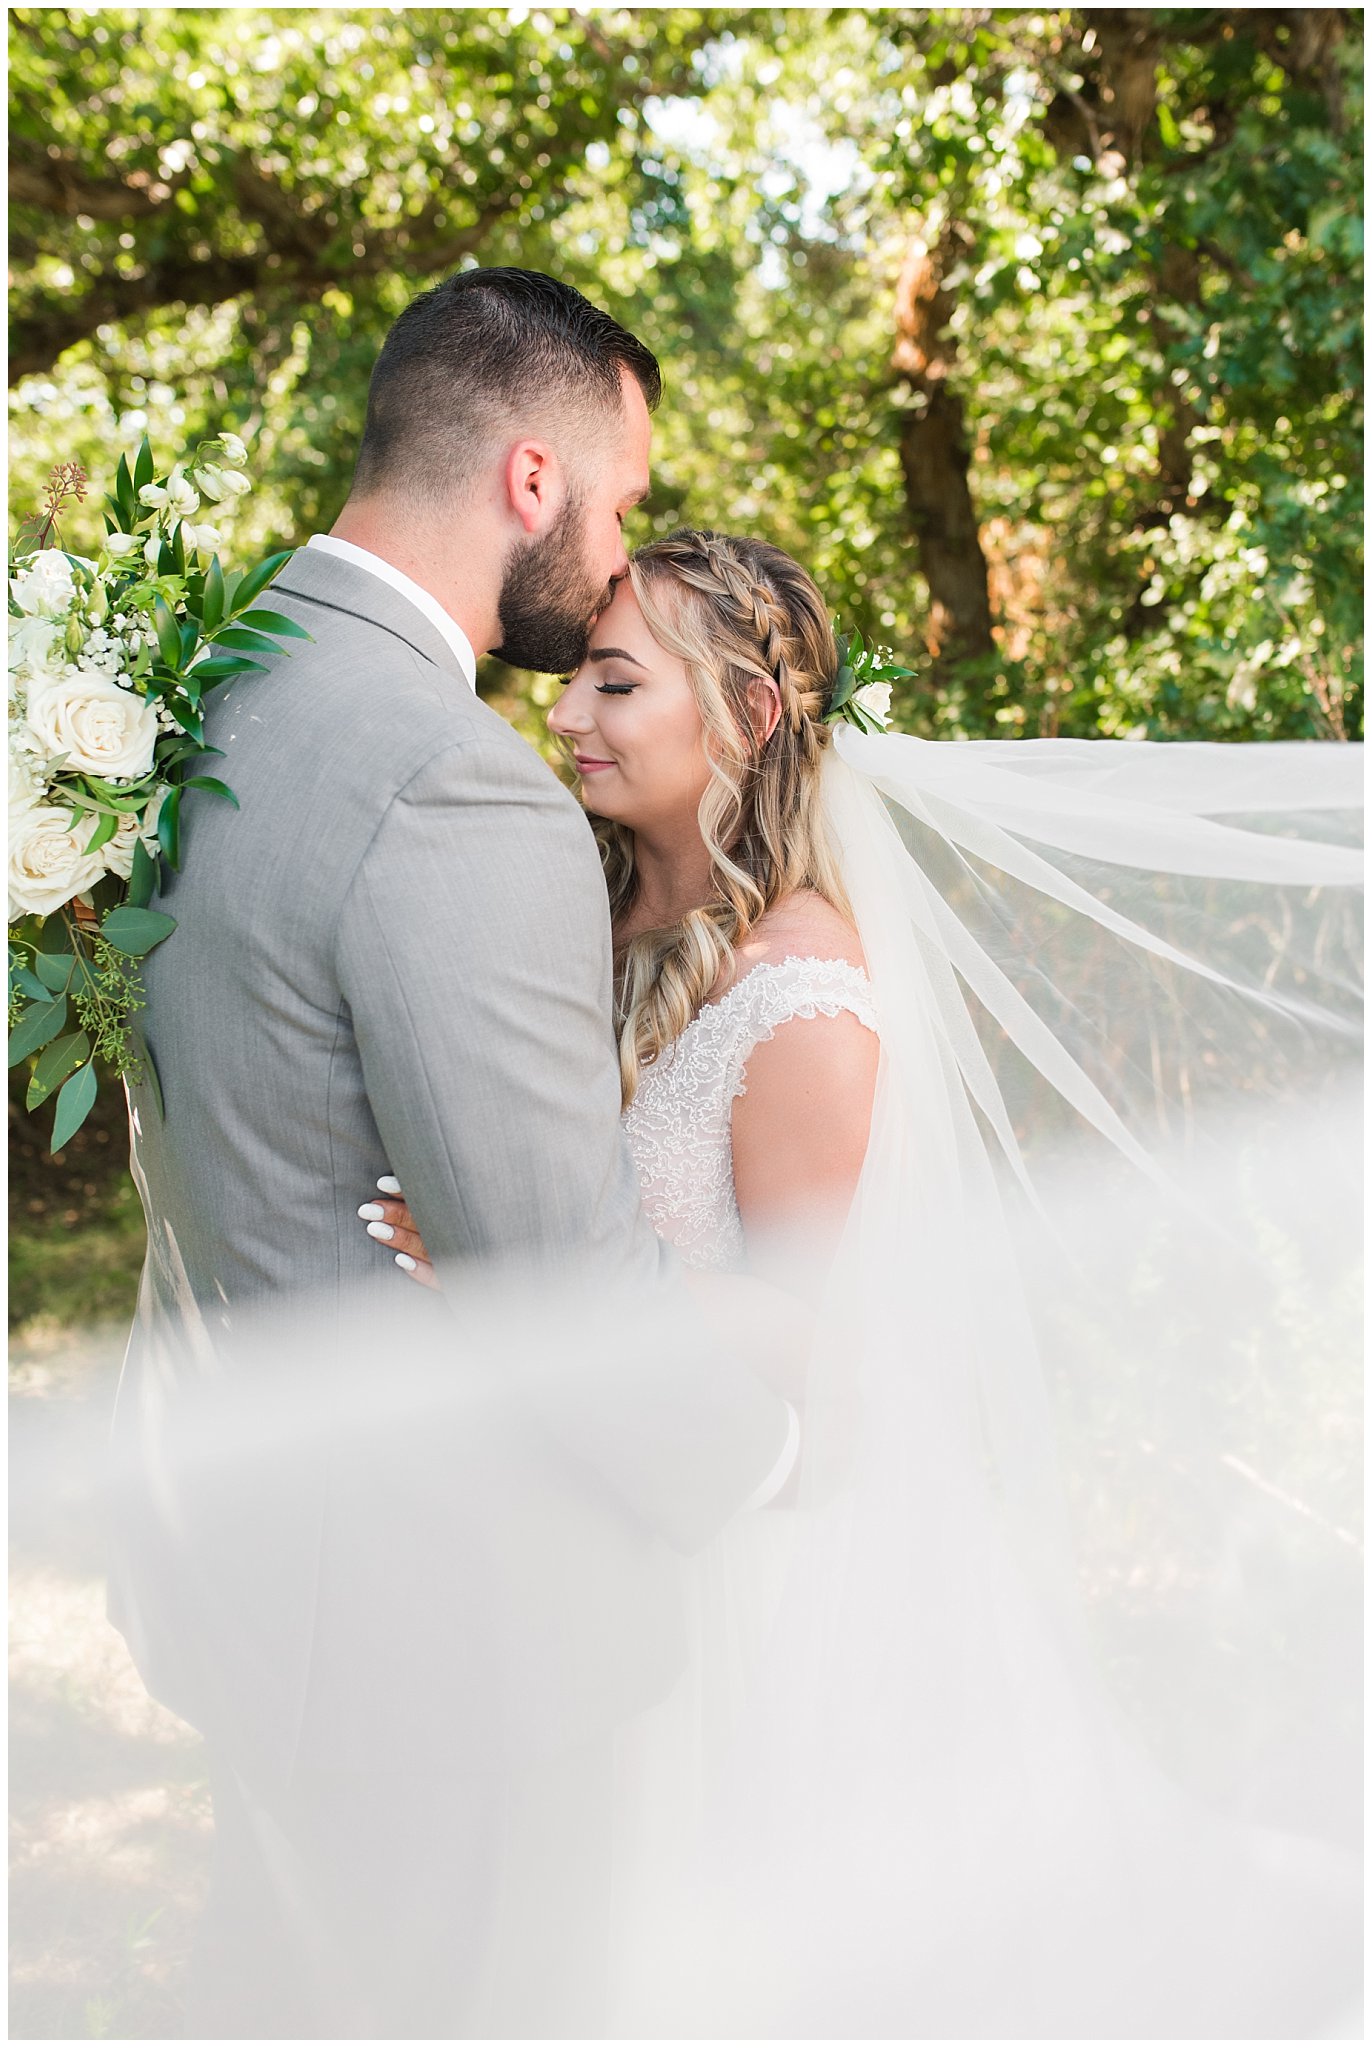 Bride and groom first look in woods wearing gray suit and sage green tie and champagne dress with veil | Sage Green and Gray Summer Wedding at Oak Hills | Jessie and Dallin Photography